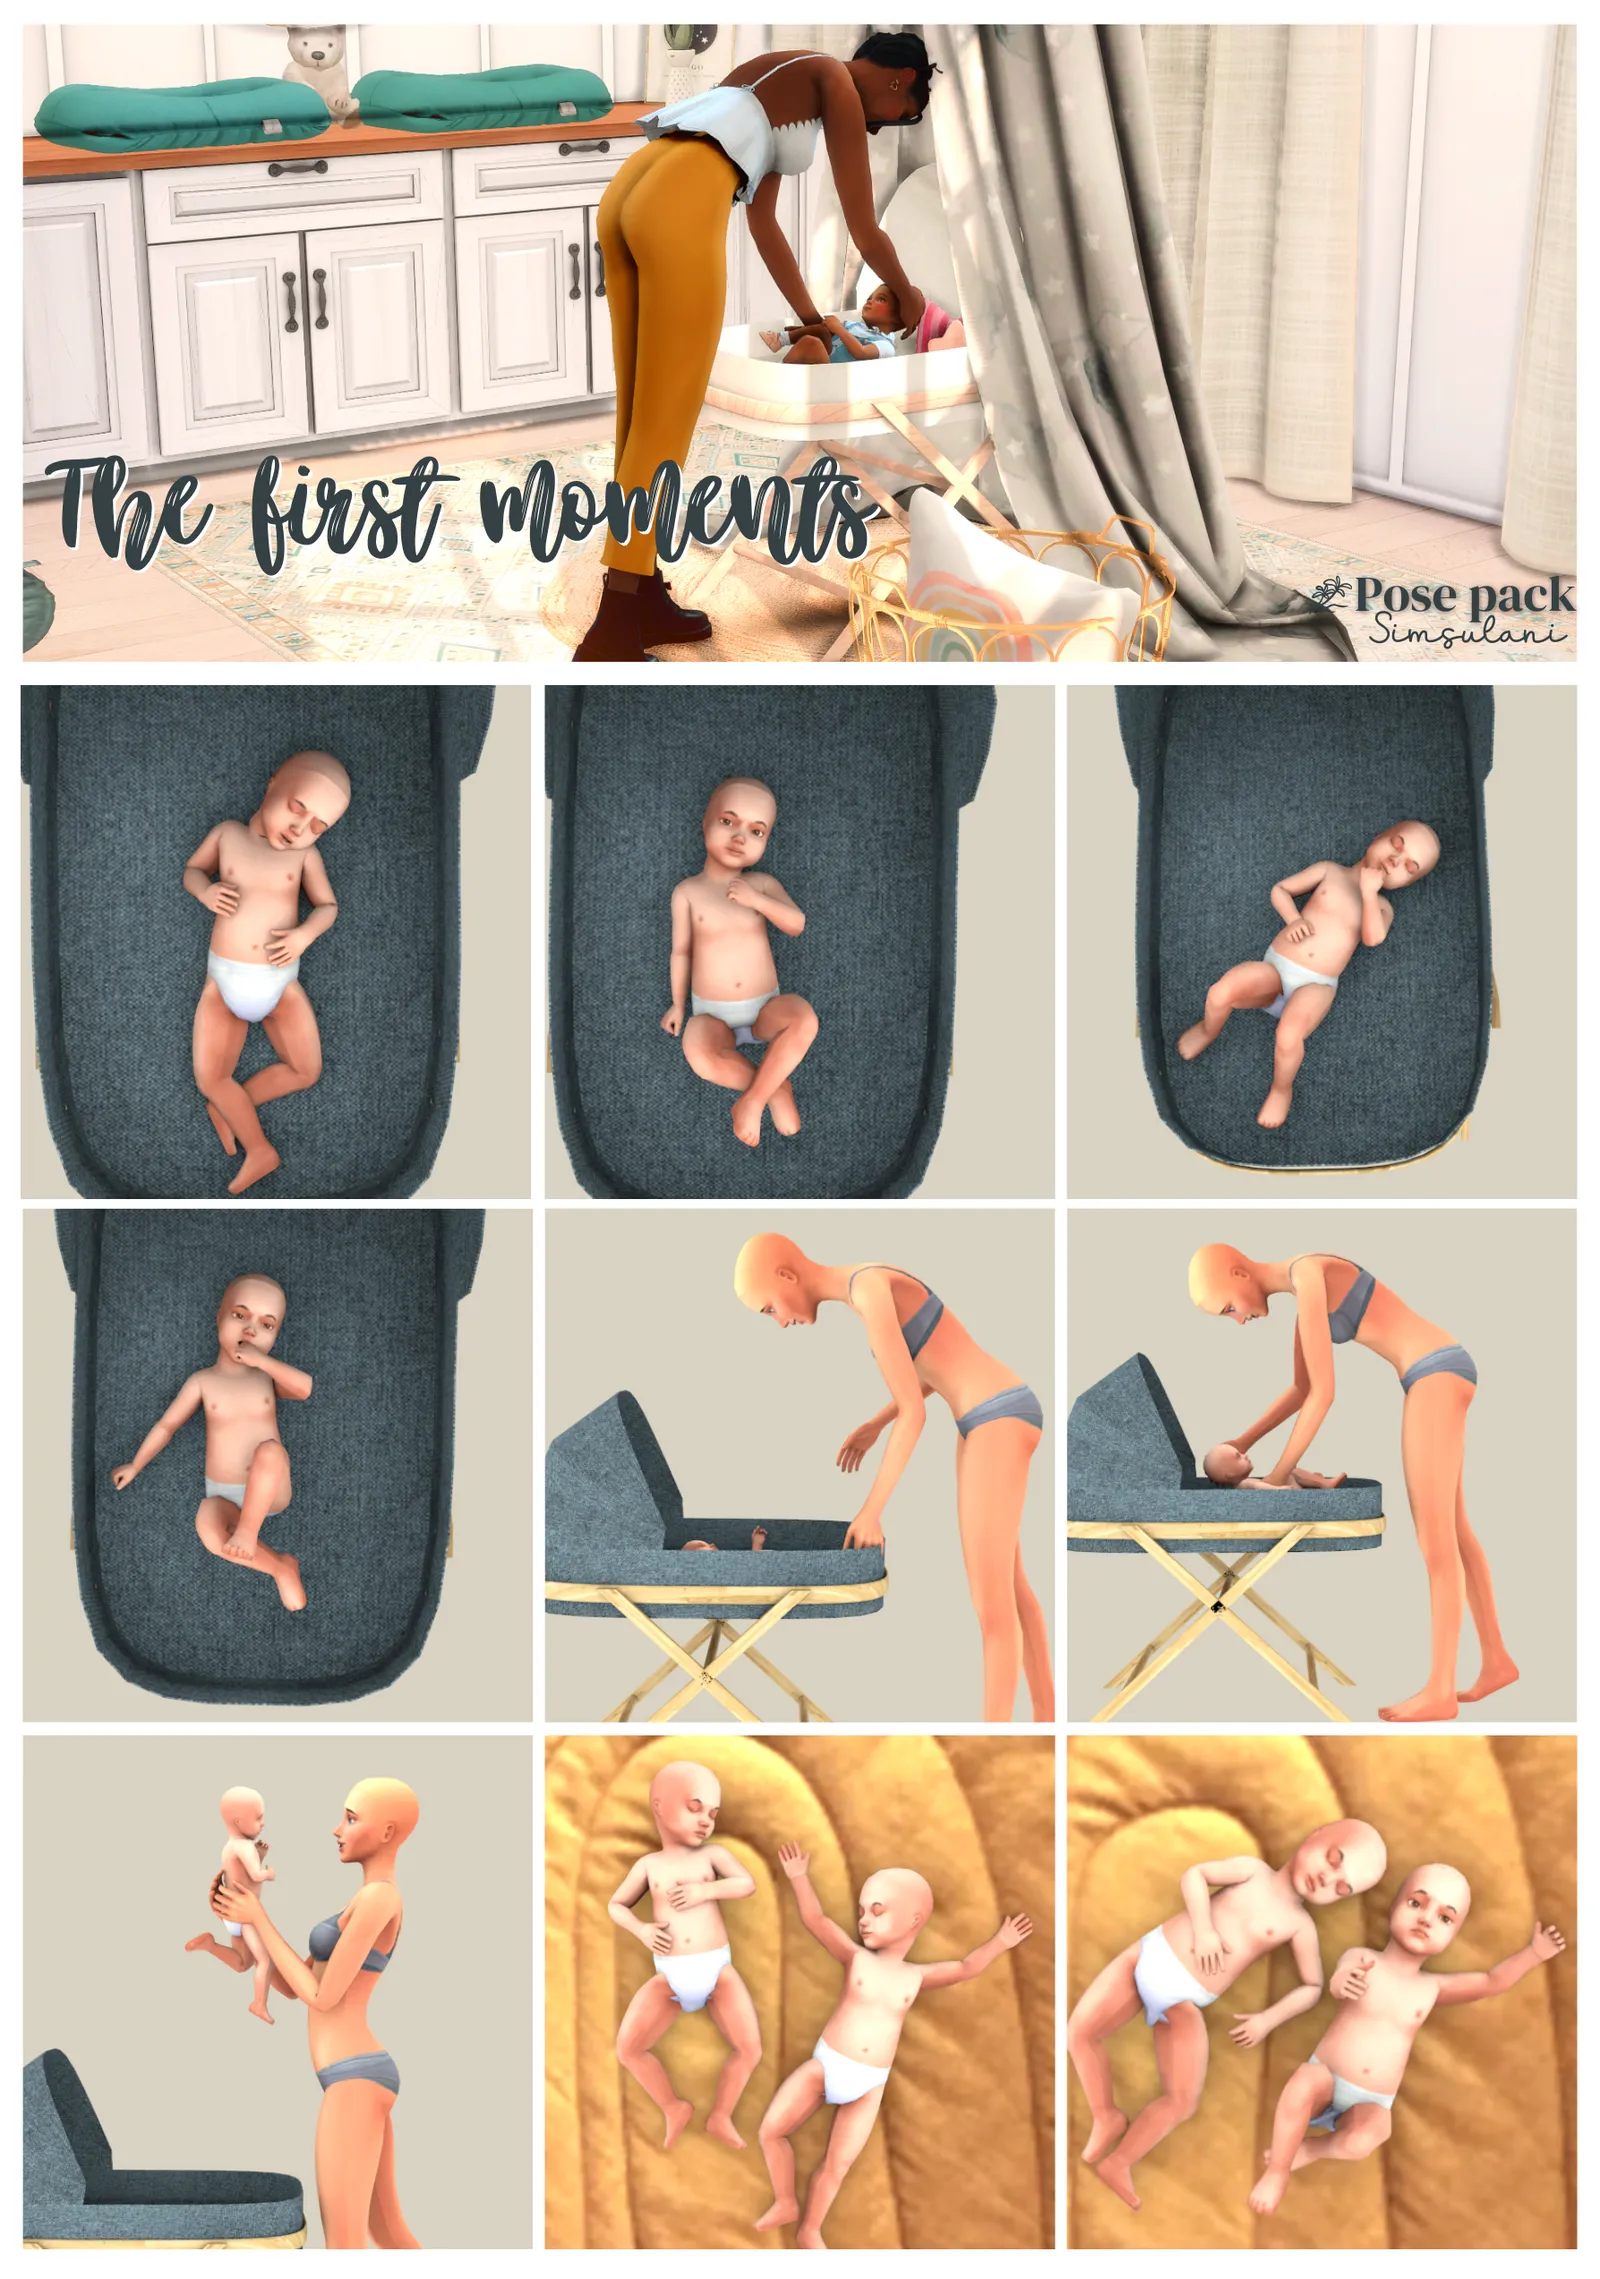 #177 Pose Pack - The First Moments